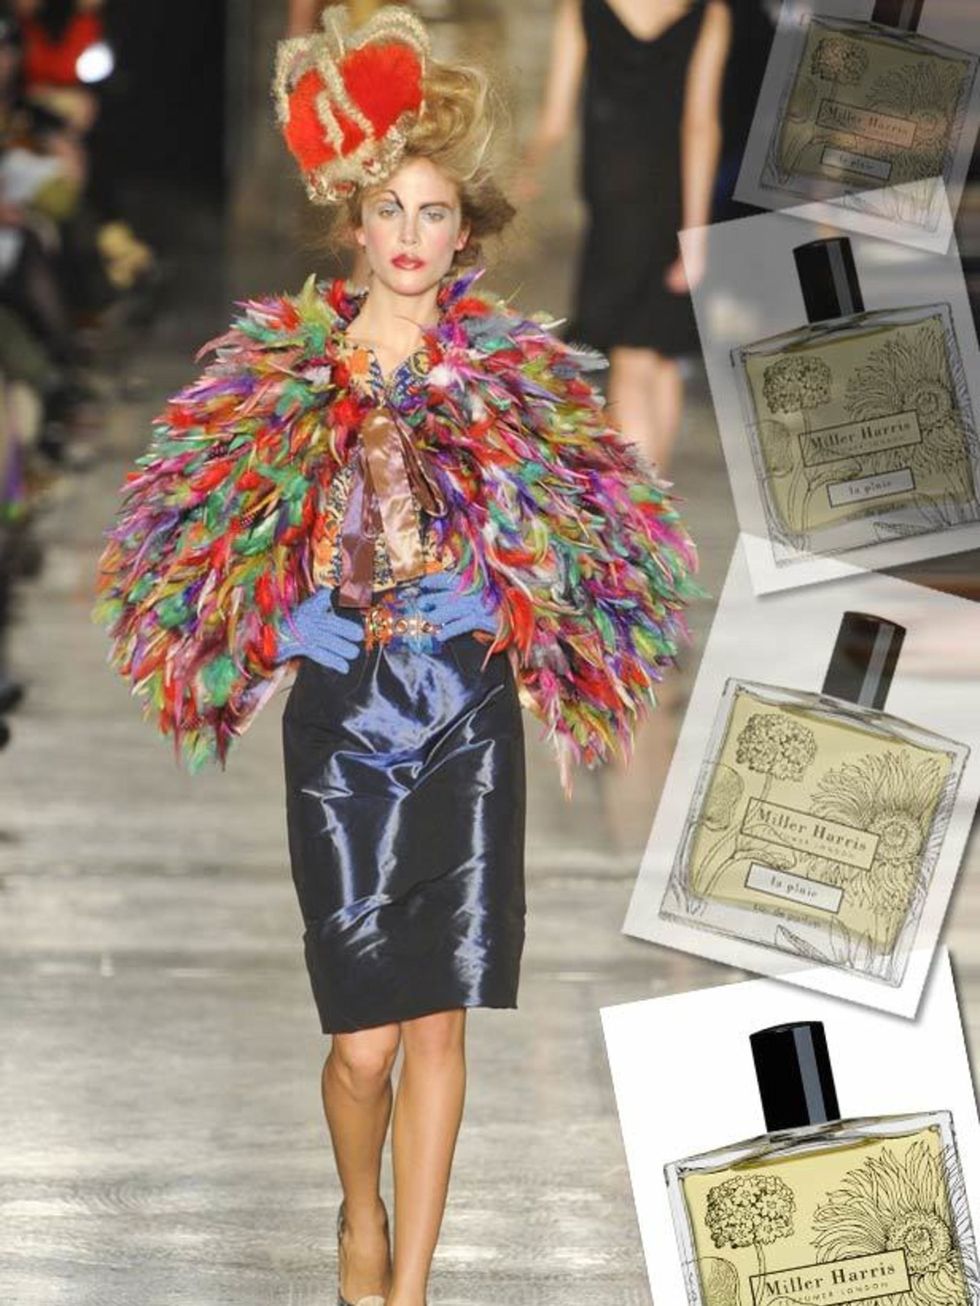 <p>'Conjuring the inky blue-black of clouds heavy with rain and the heightened sense of expectancy before a thunderstorm,' is how Miller Harris La Pluie, £85 for 100ml edp (<a href="http://www.millerharris.com/home/">www.millerharris.com</a>) is described